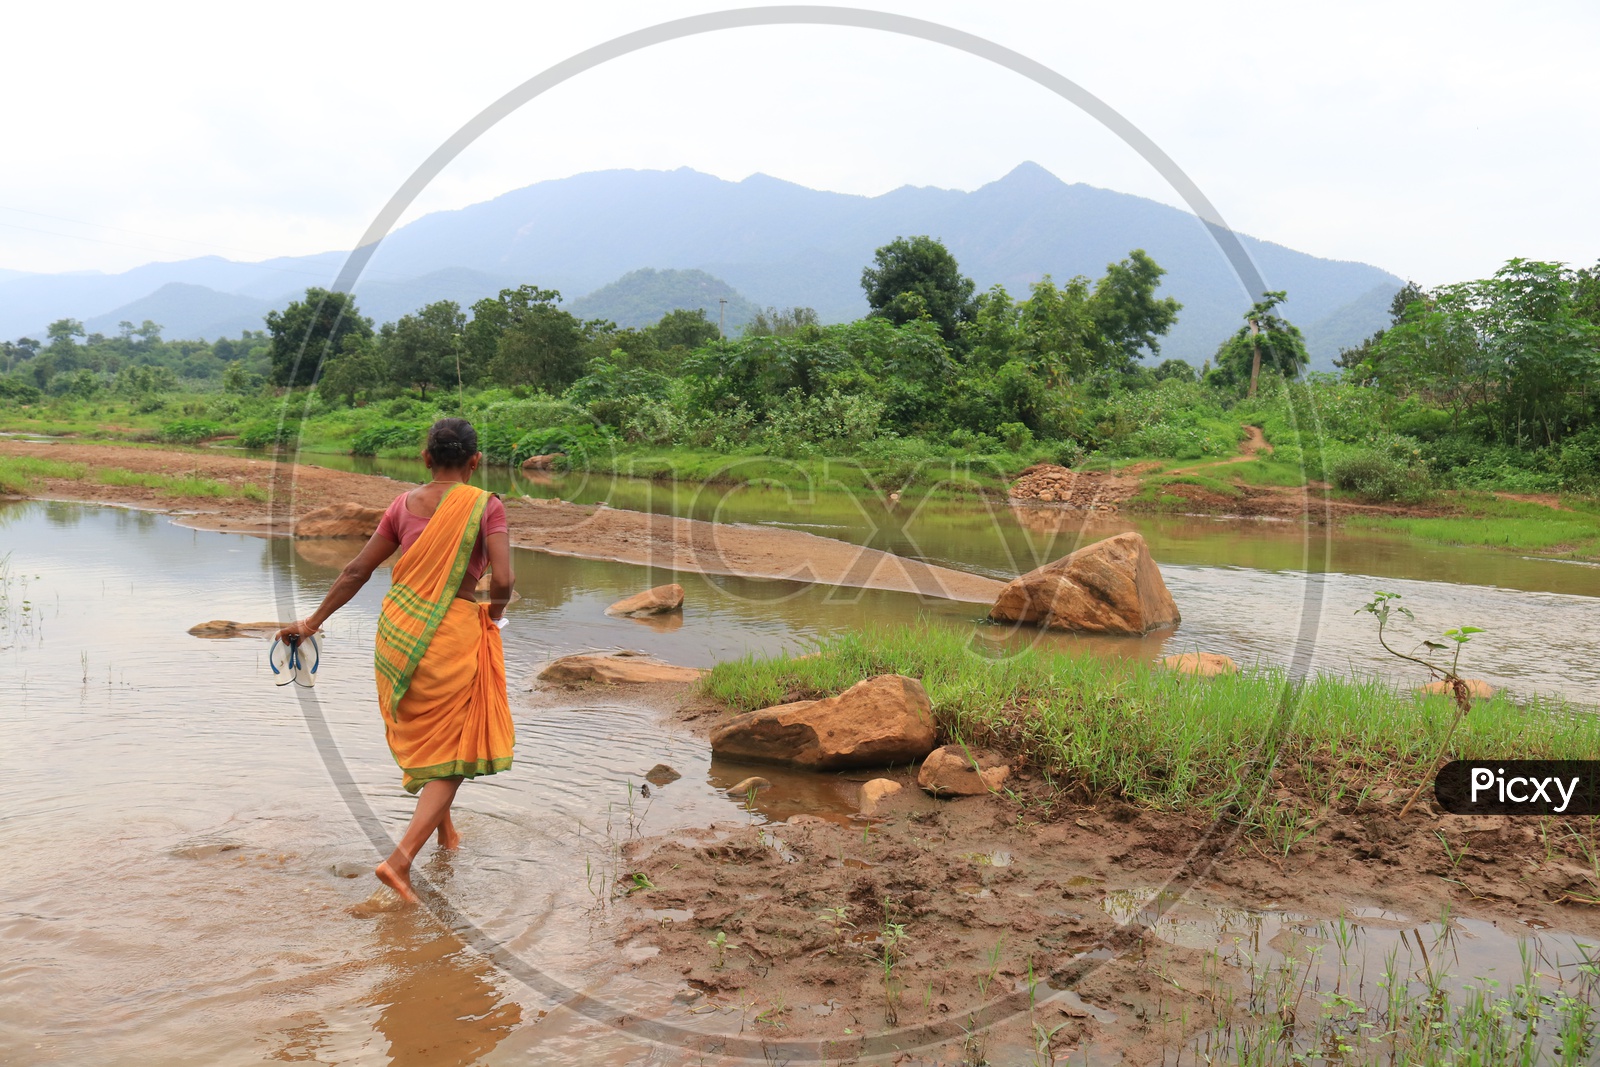 A Woman Crossing A Water Channel In rural Area